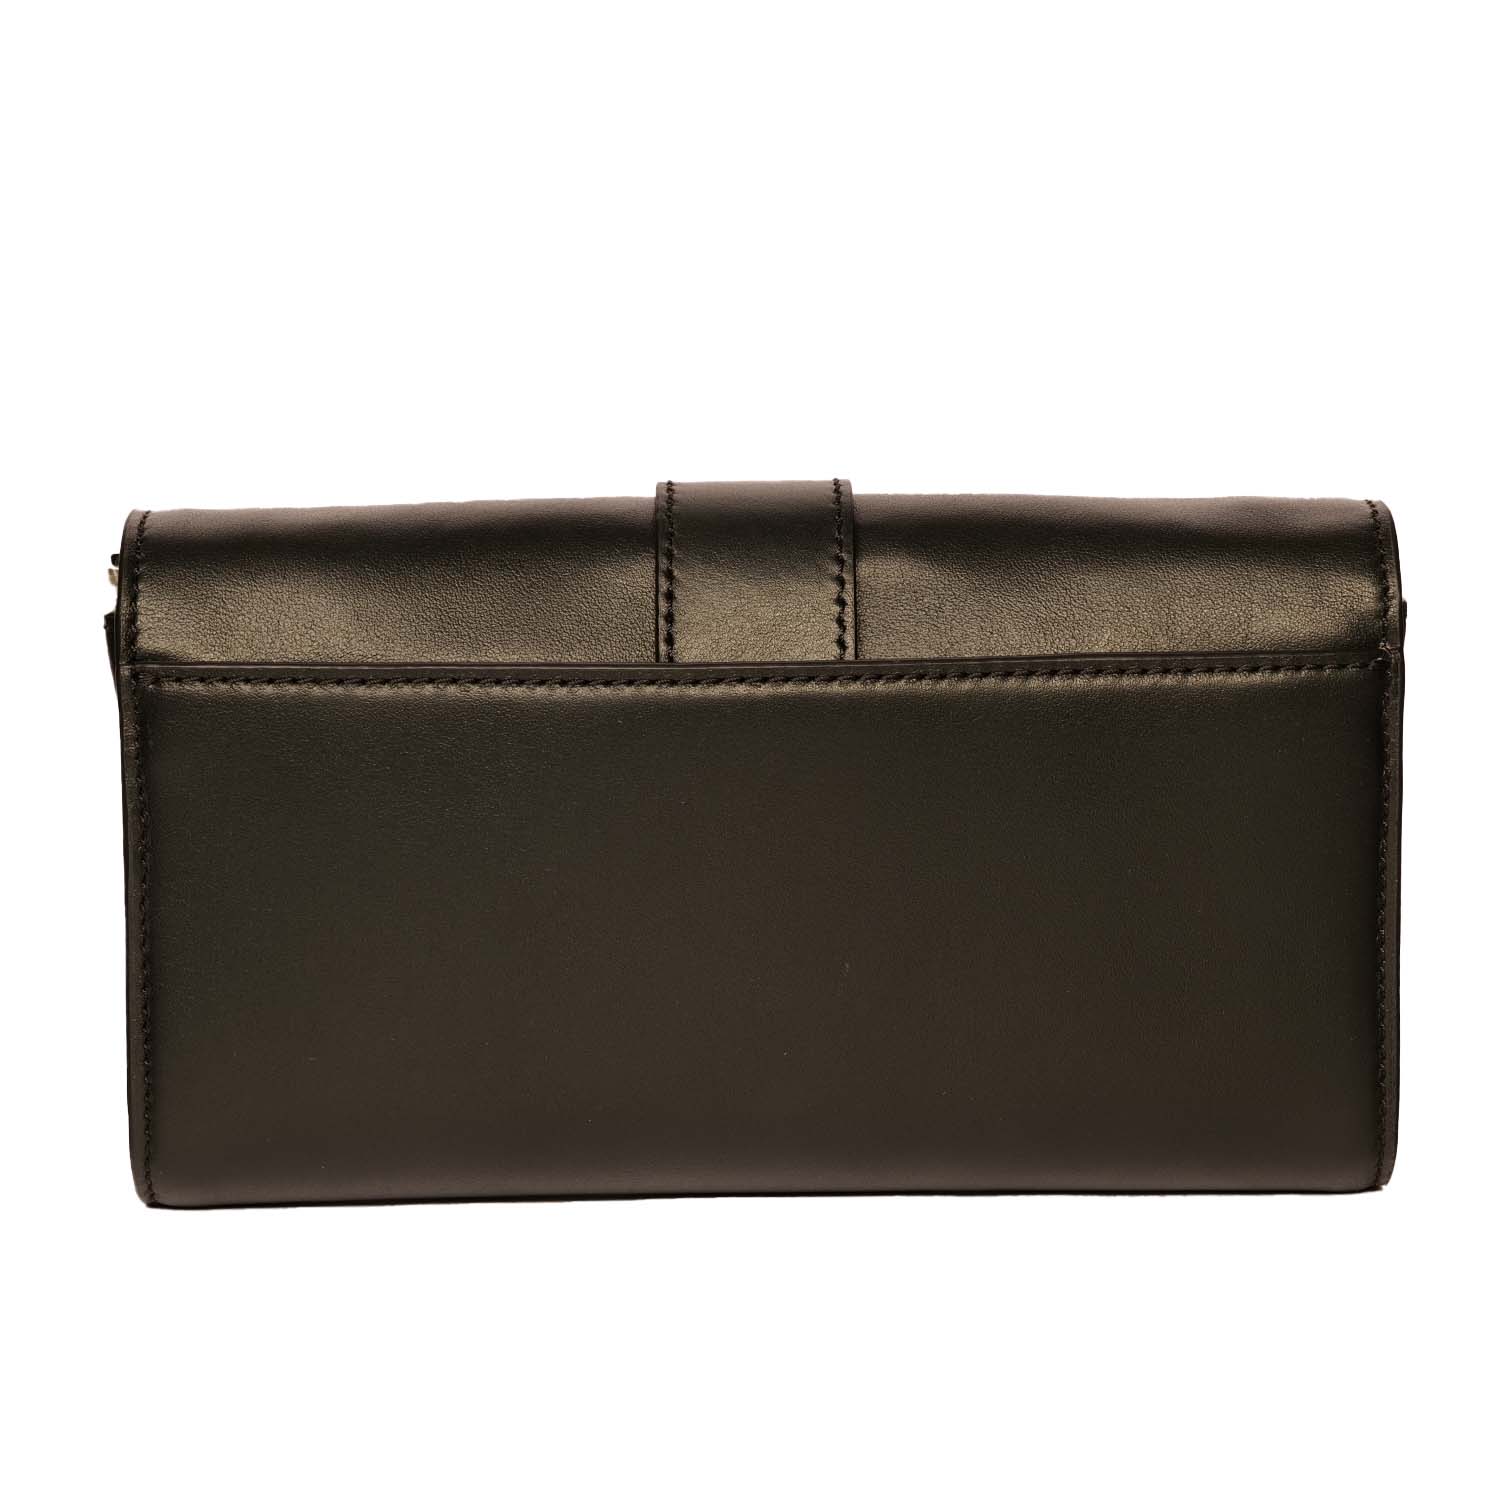 Michael Kors Clutch Bag Penelope In Leather In Rosa